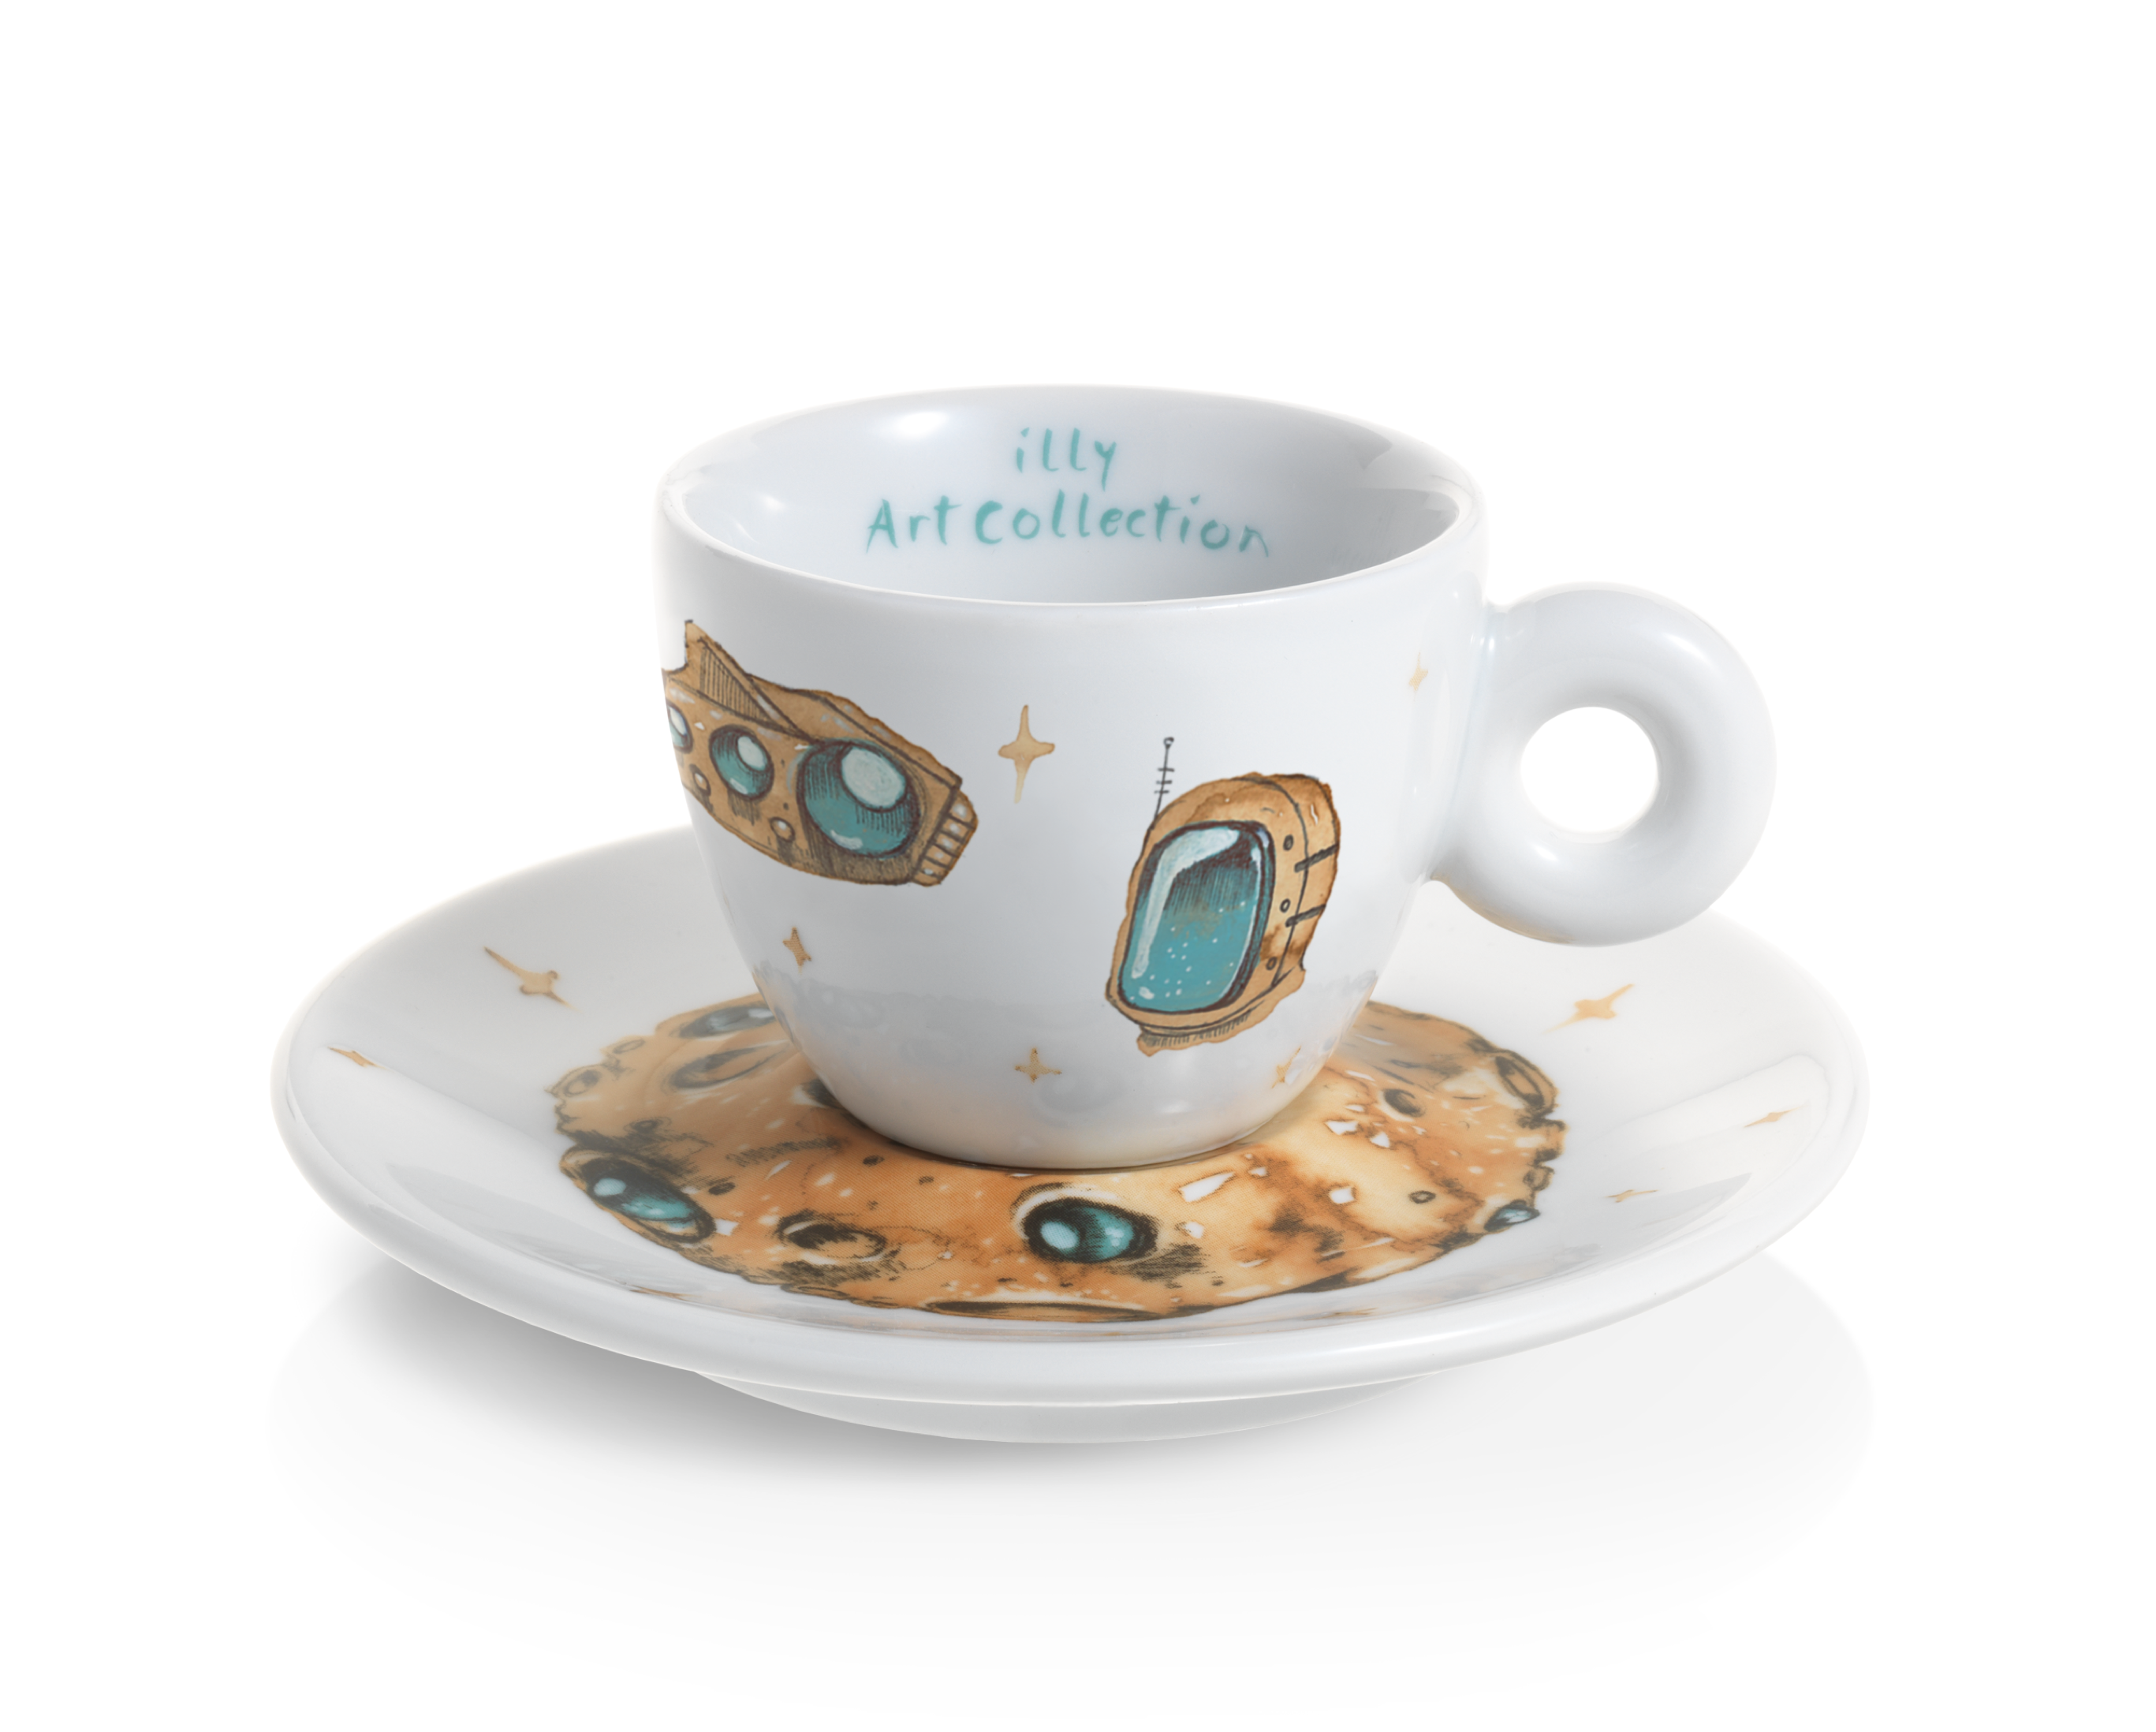 Espressotasse - illy Art Collection „Coffee Drawings“ - Max Petrone